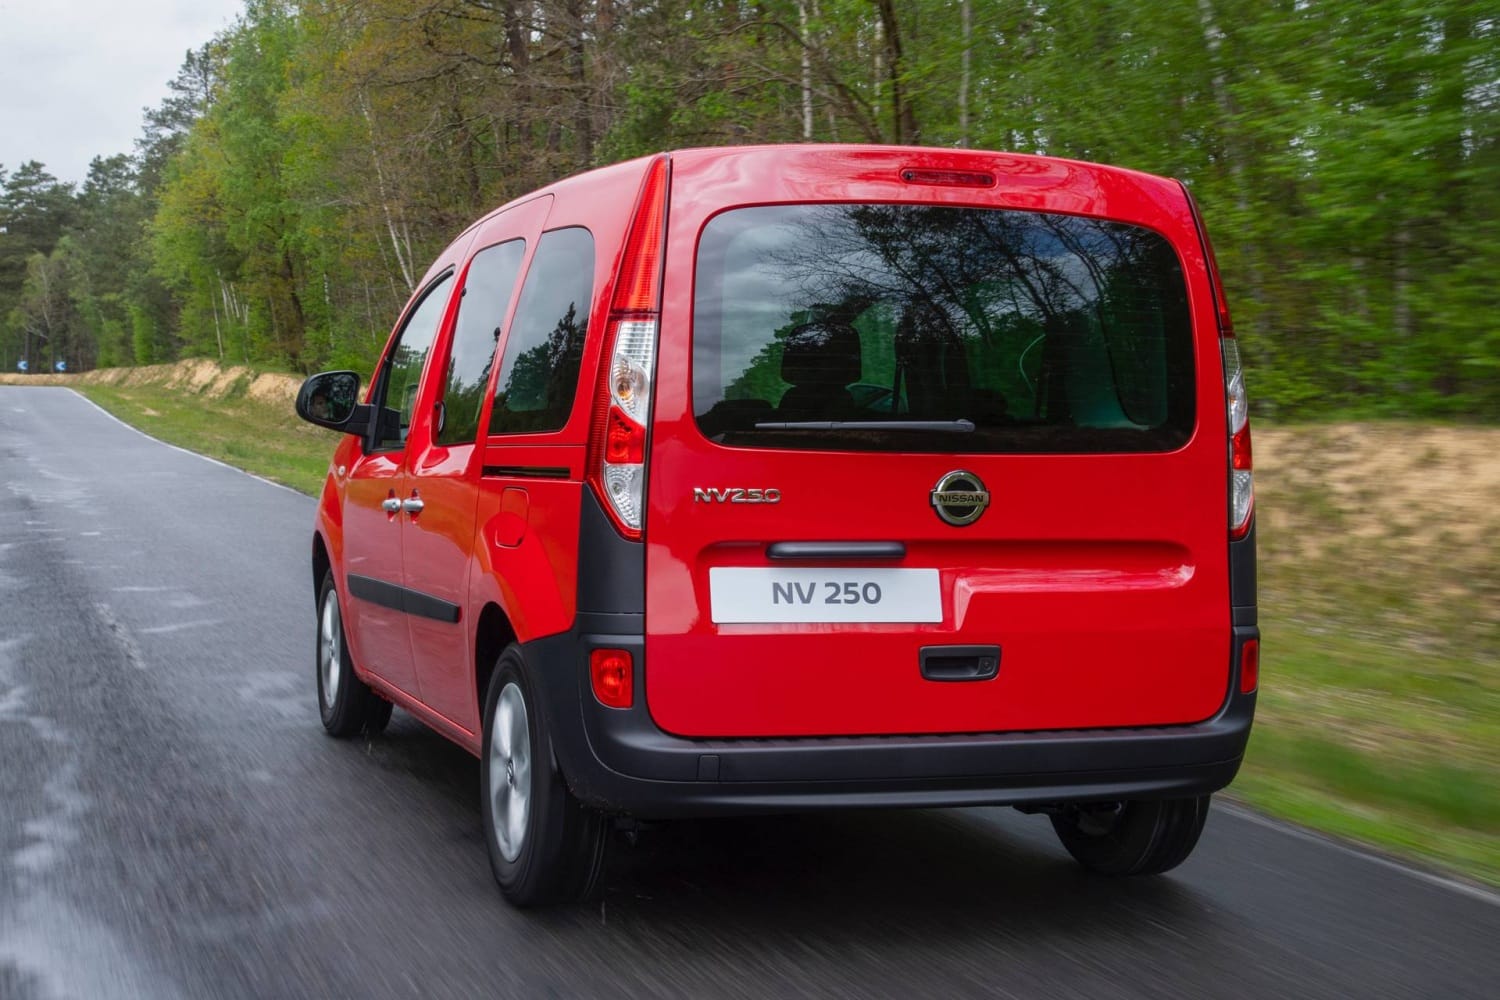 The successor to the Nissan NV200 will be produced in France